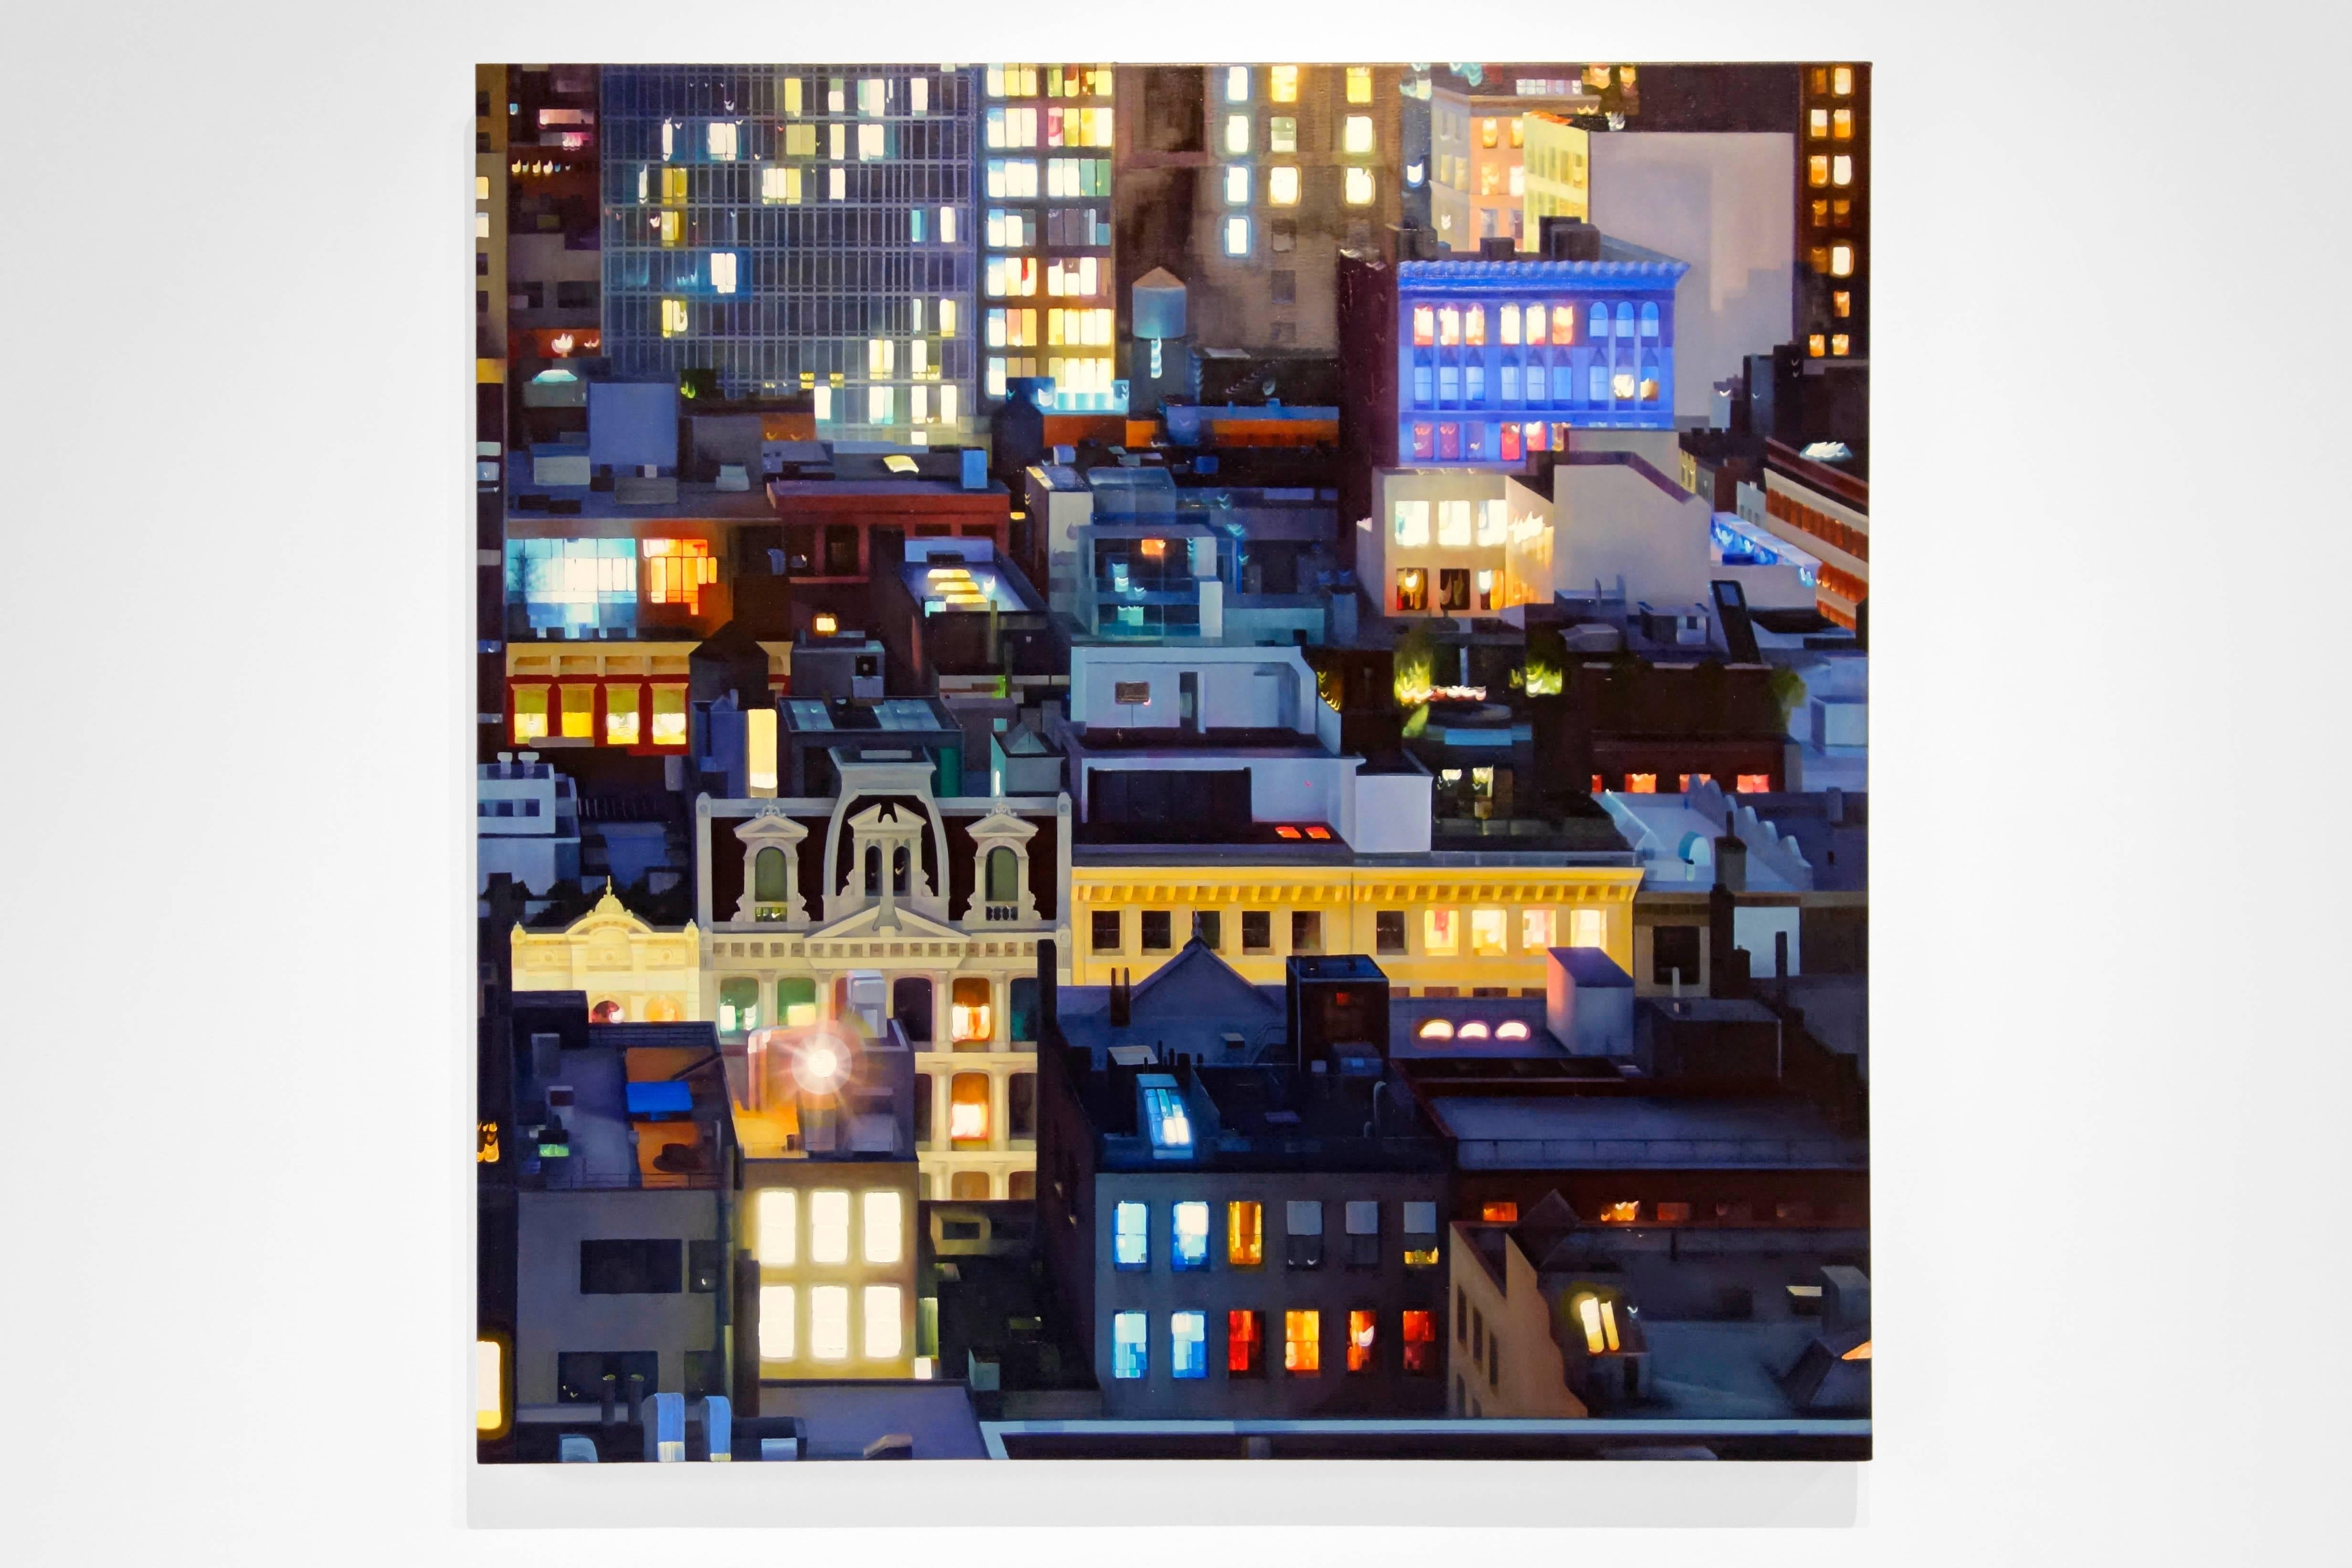 QUEEN OF GREENE, city skyline, photo-realism, detailed buildings, window lights - Painting by Alexandra Pacula